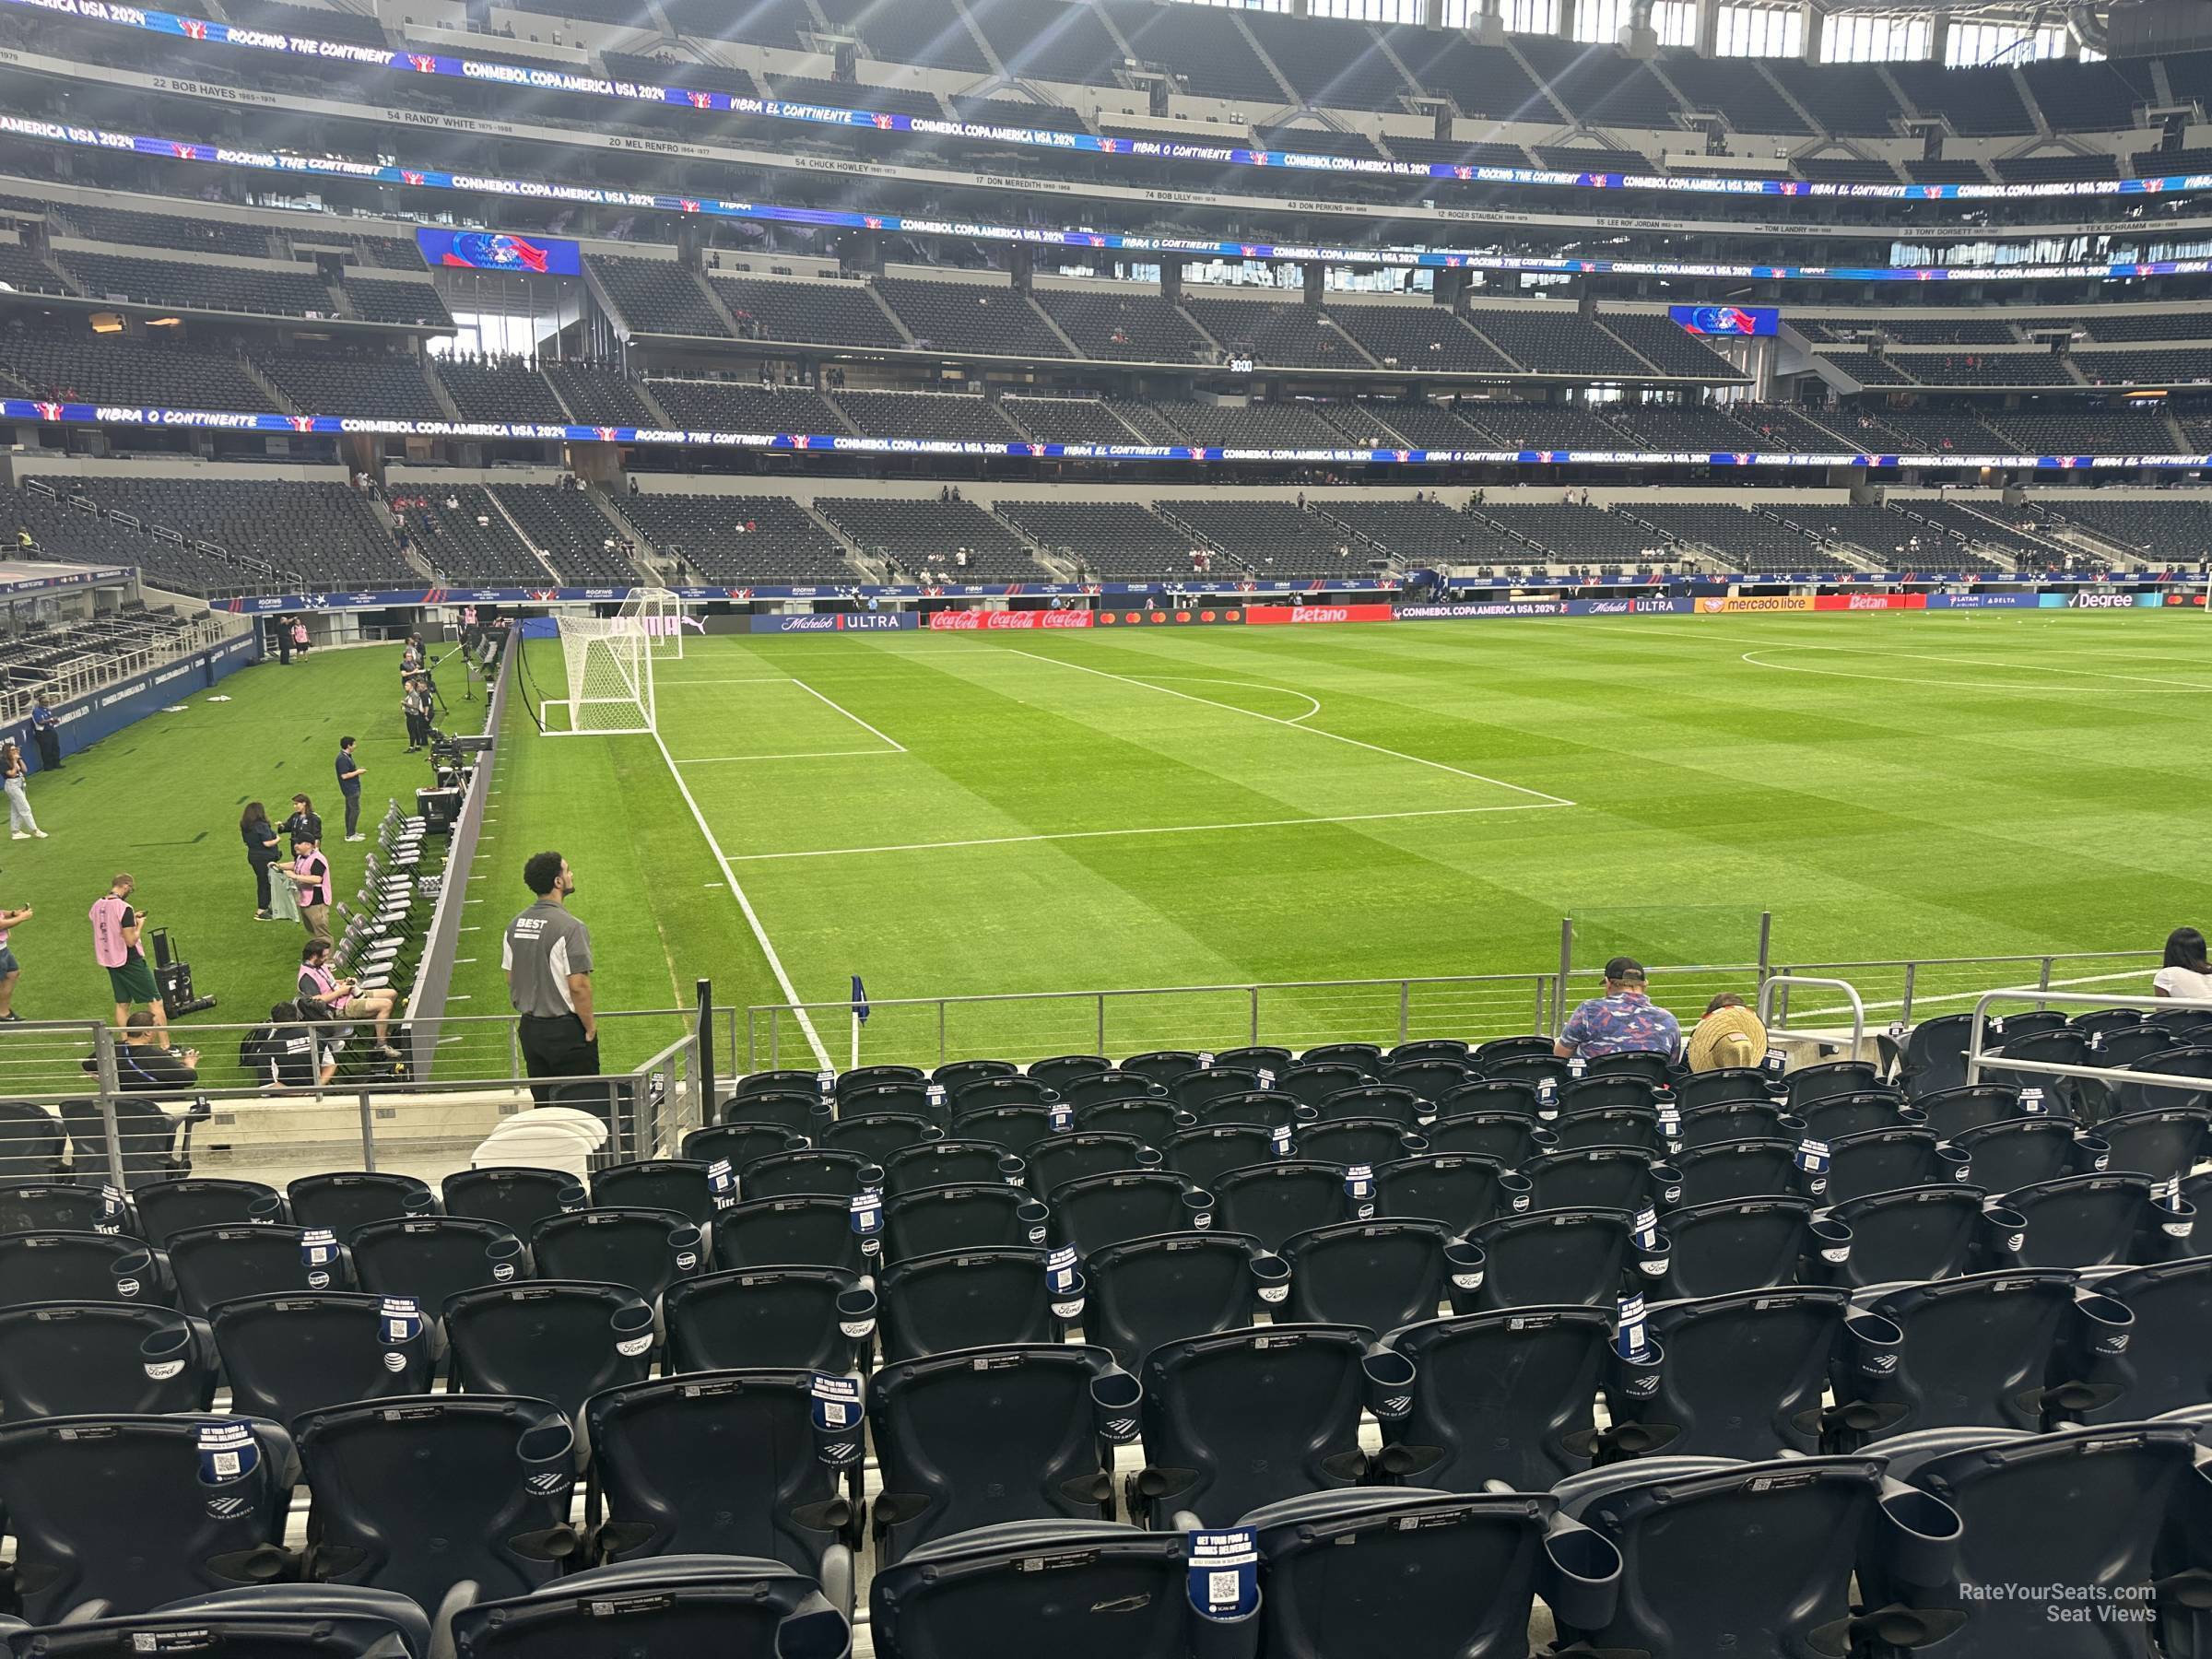 section 143, row 11 seat view  for soccer - at&t stadium (cowboys stadium)